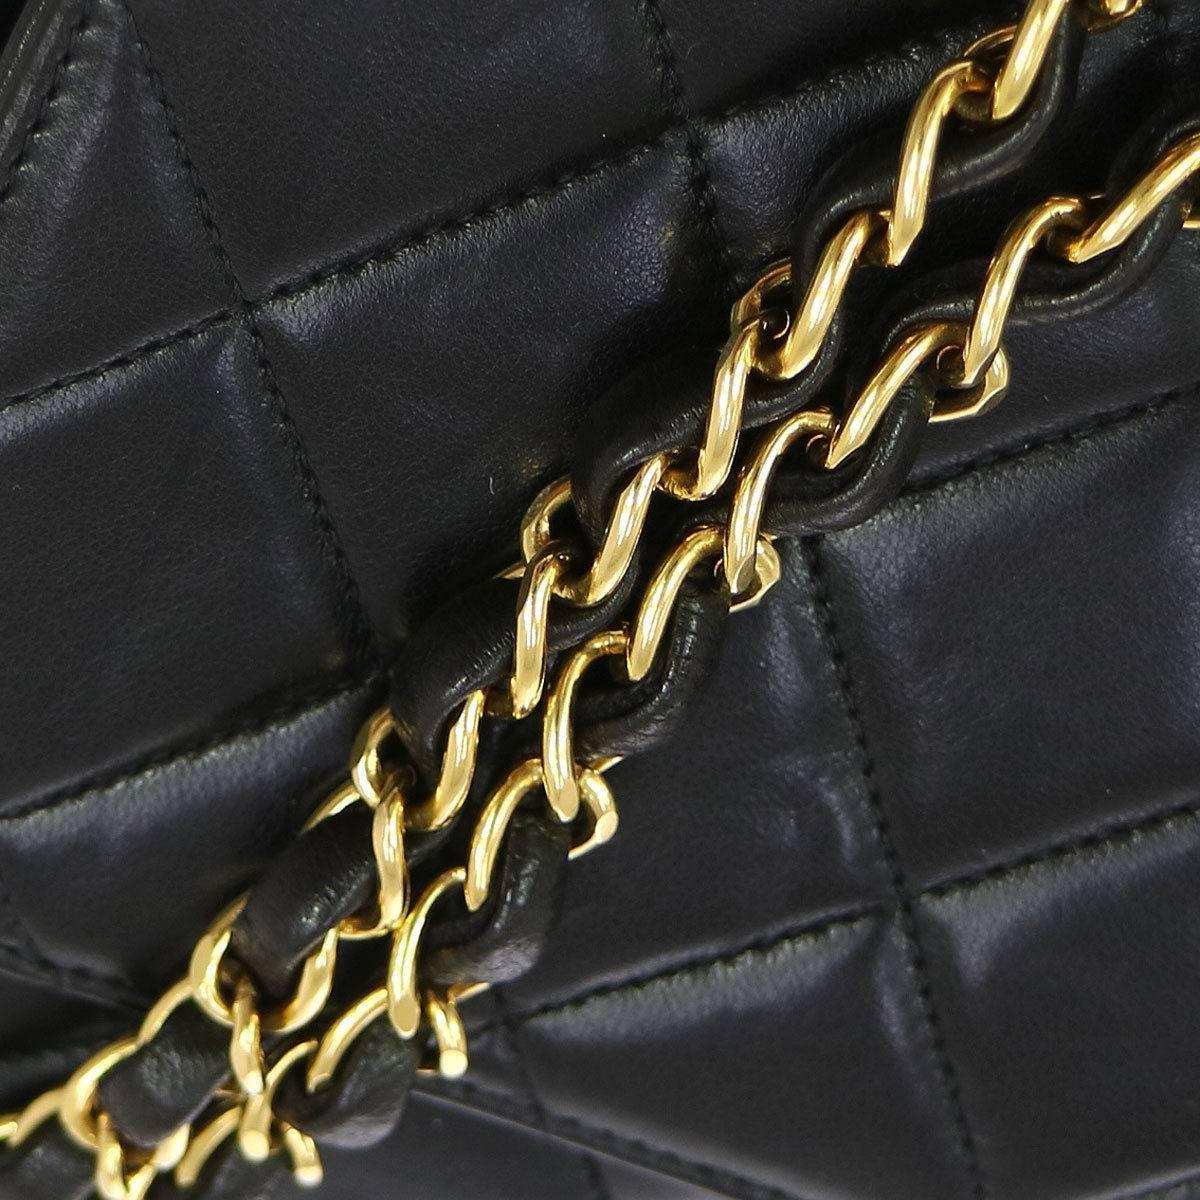 CURATOR'S NOTES

Chanel Black Lambskin Quilted Camera Flap Evening Crossbody Shoulder Bag 

Lambskin
Gold tone hardware
Magnetic clap closure
Leather lining
Made in France
Date code present
Shoulder strap drop 18"
Measures 11" W x